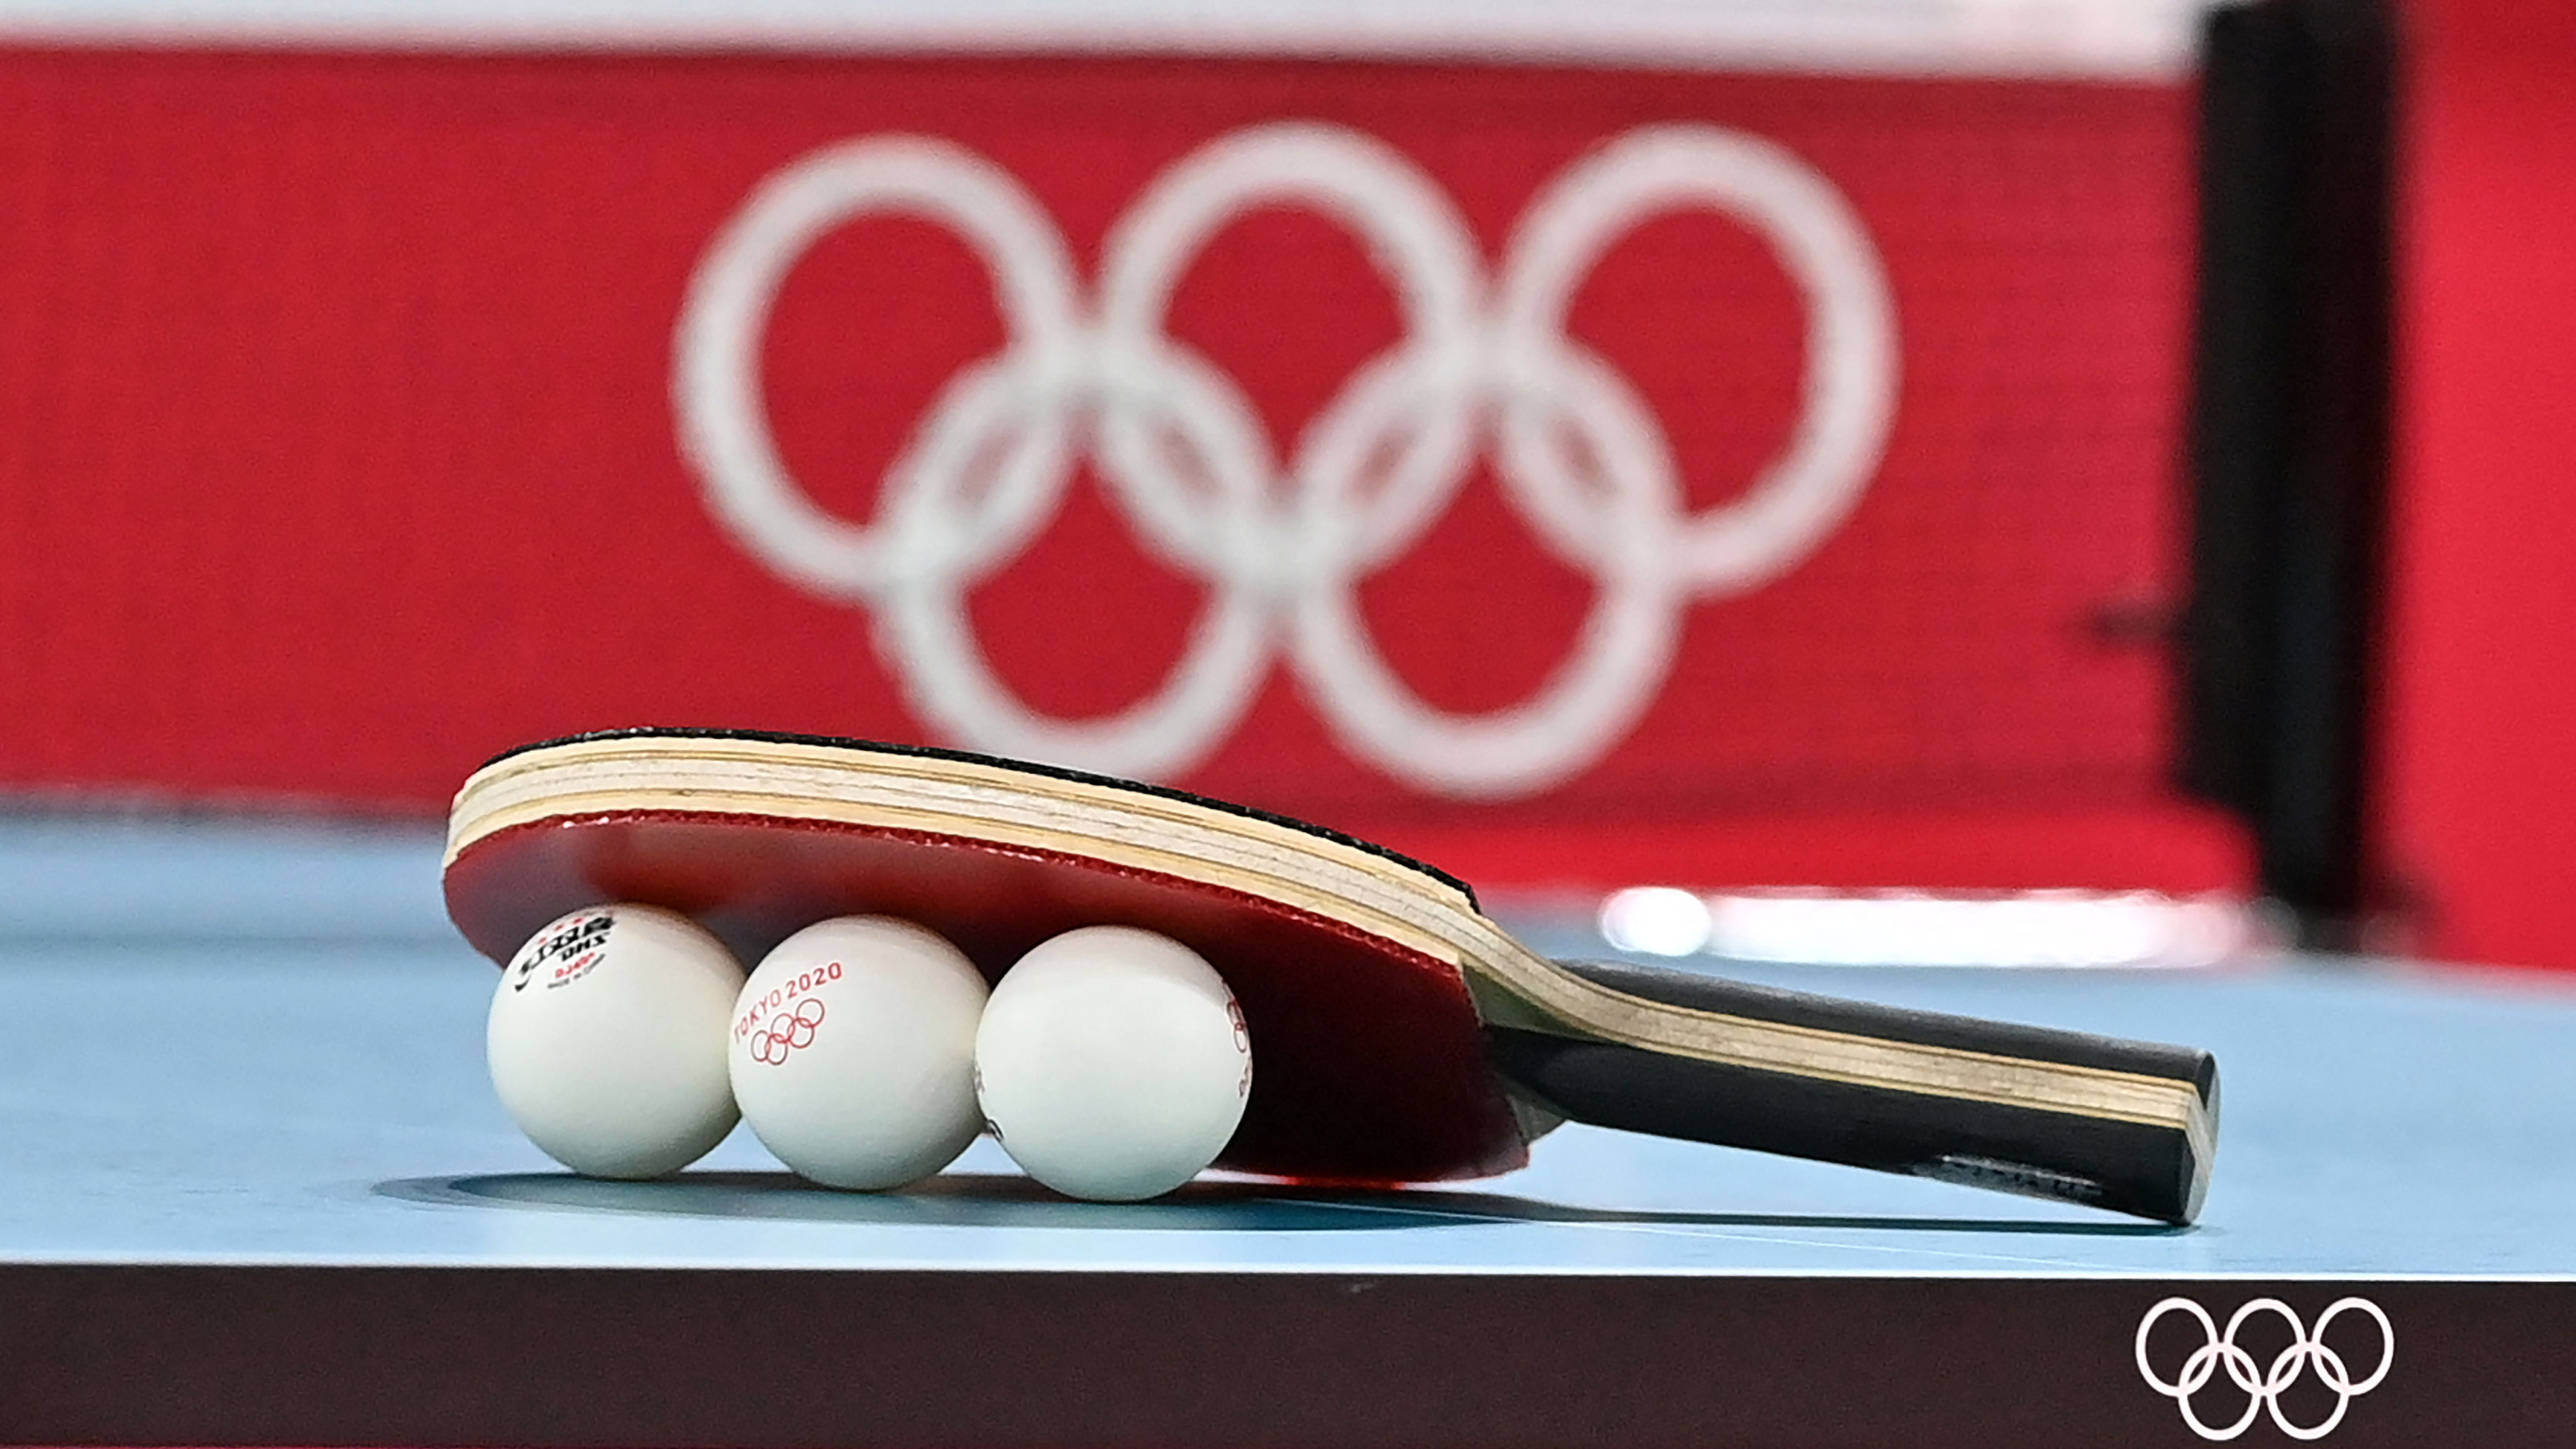 It's not ping-pong: Here's the history of the Olympic sport's common nickname